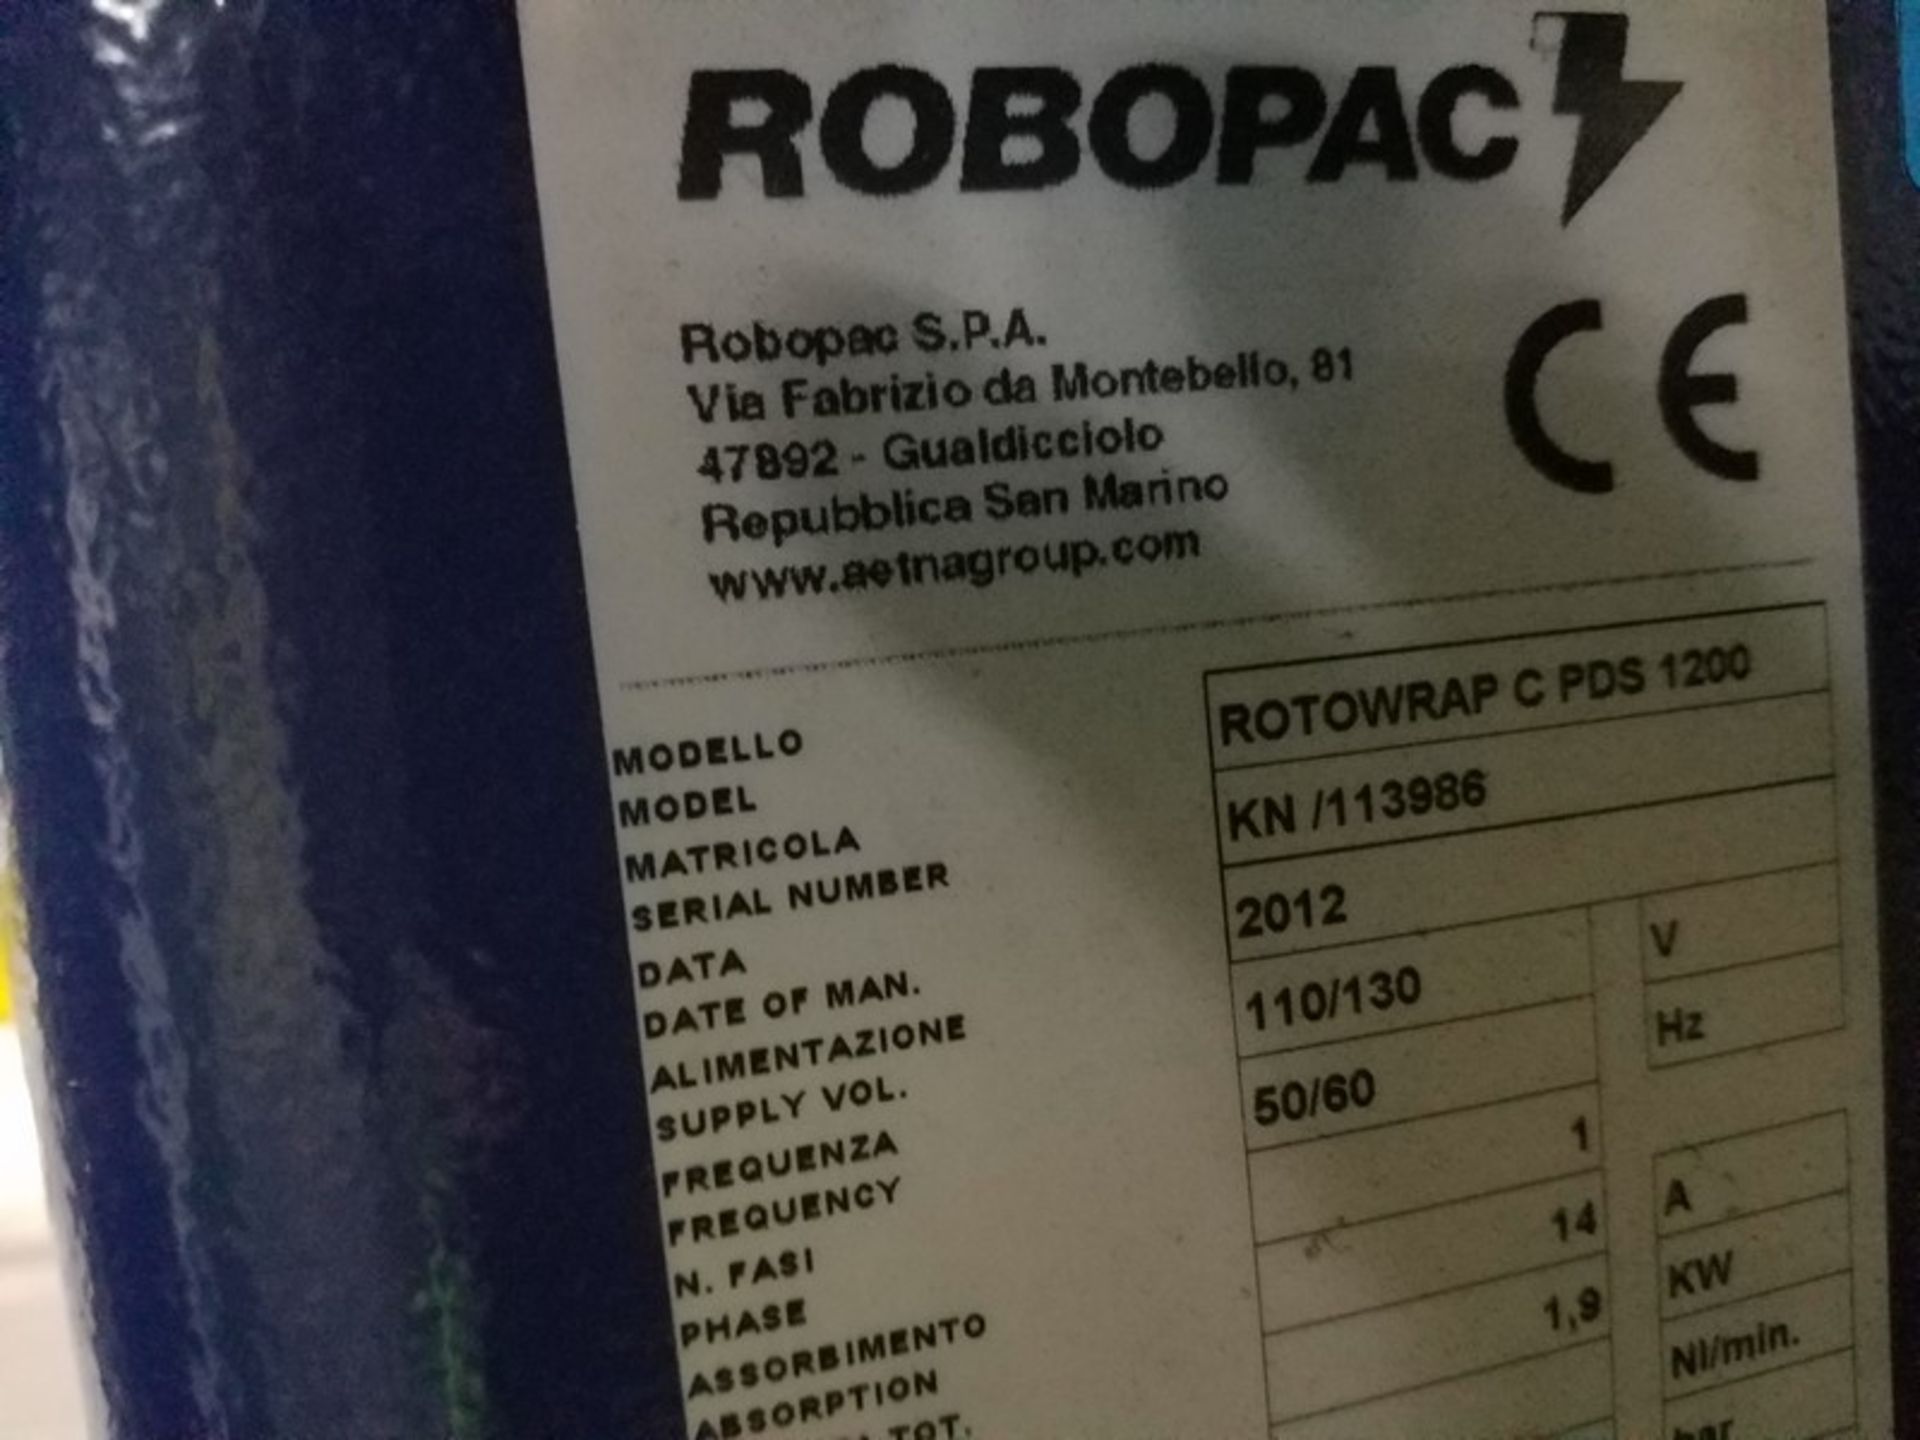 Robopak Rotowrap CPDS1200 over head pallet wrapper, pre-strch, serial # KN/113986, 110" height, - Image 5 of 5